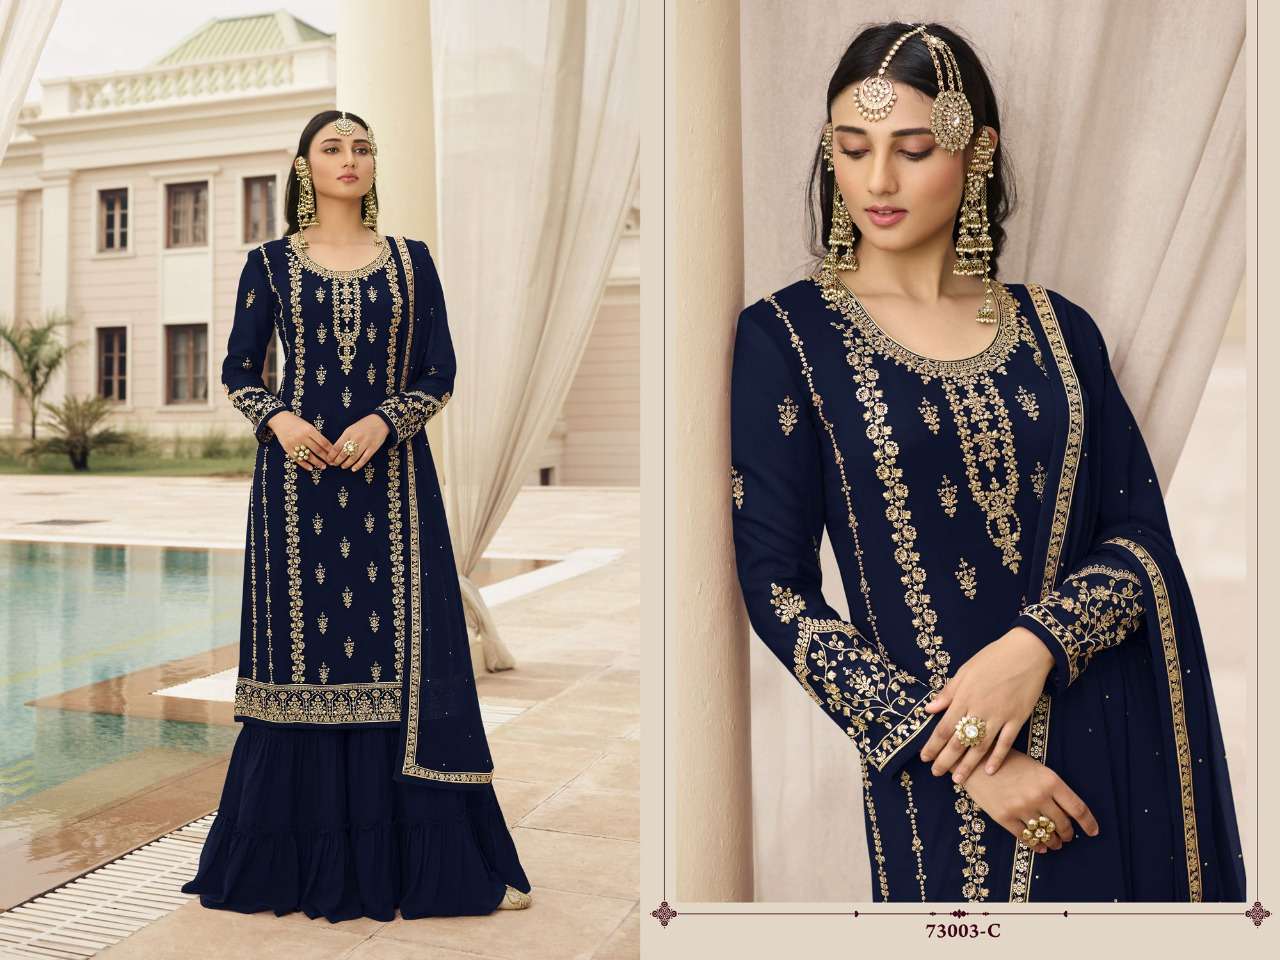 NITYA 73003 COLOURS BY LT FABRICS 73003-A TO 73003-F SERIES BEAUTIFUL STYLISH SHARARA SUITS FANCY COLORFUL CASUAL WEAR & ETHNIC WEAR & READY TO WEAR HEAVY FAUX GEORGETTE DRESSES AT WHOLESALE PRICE